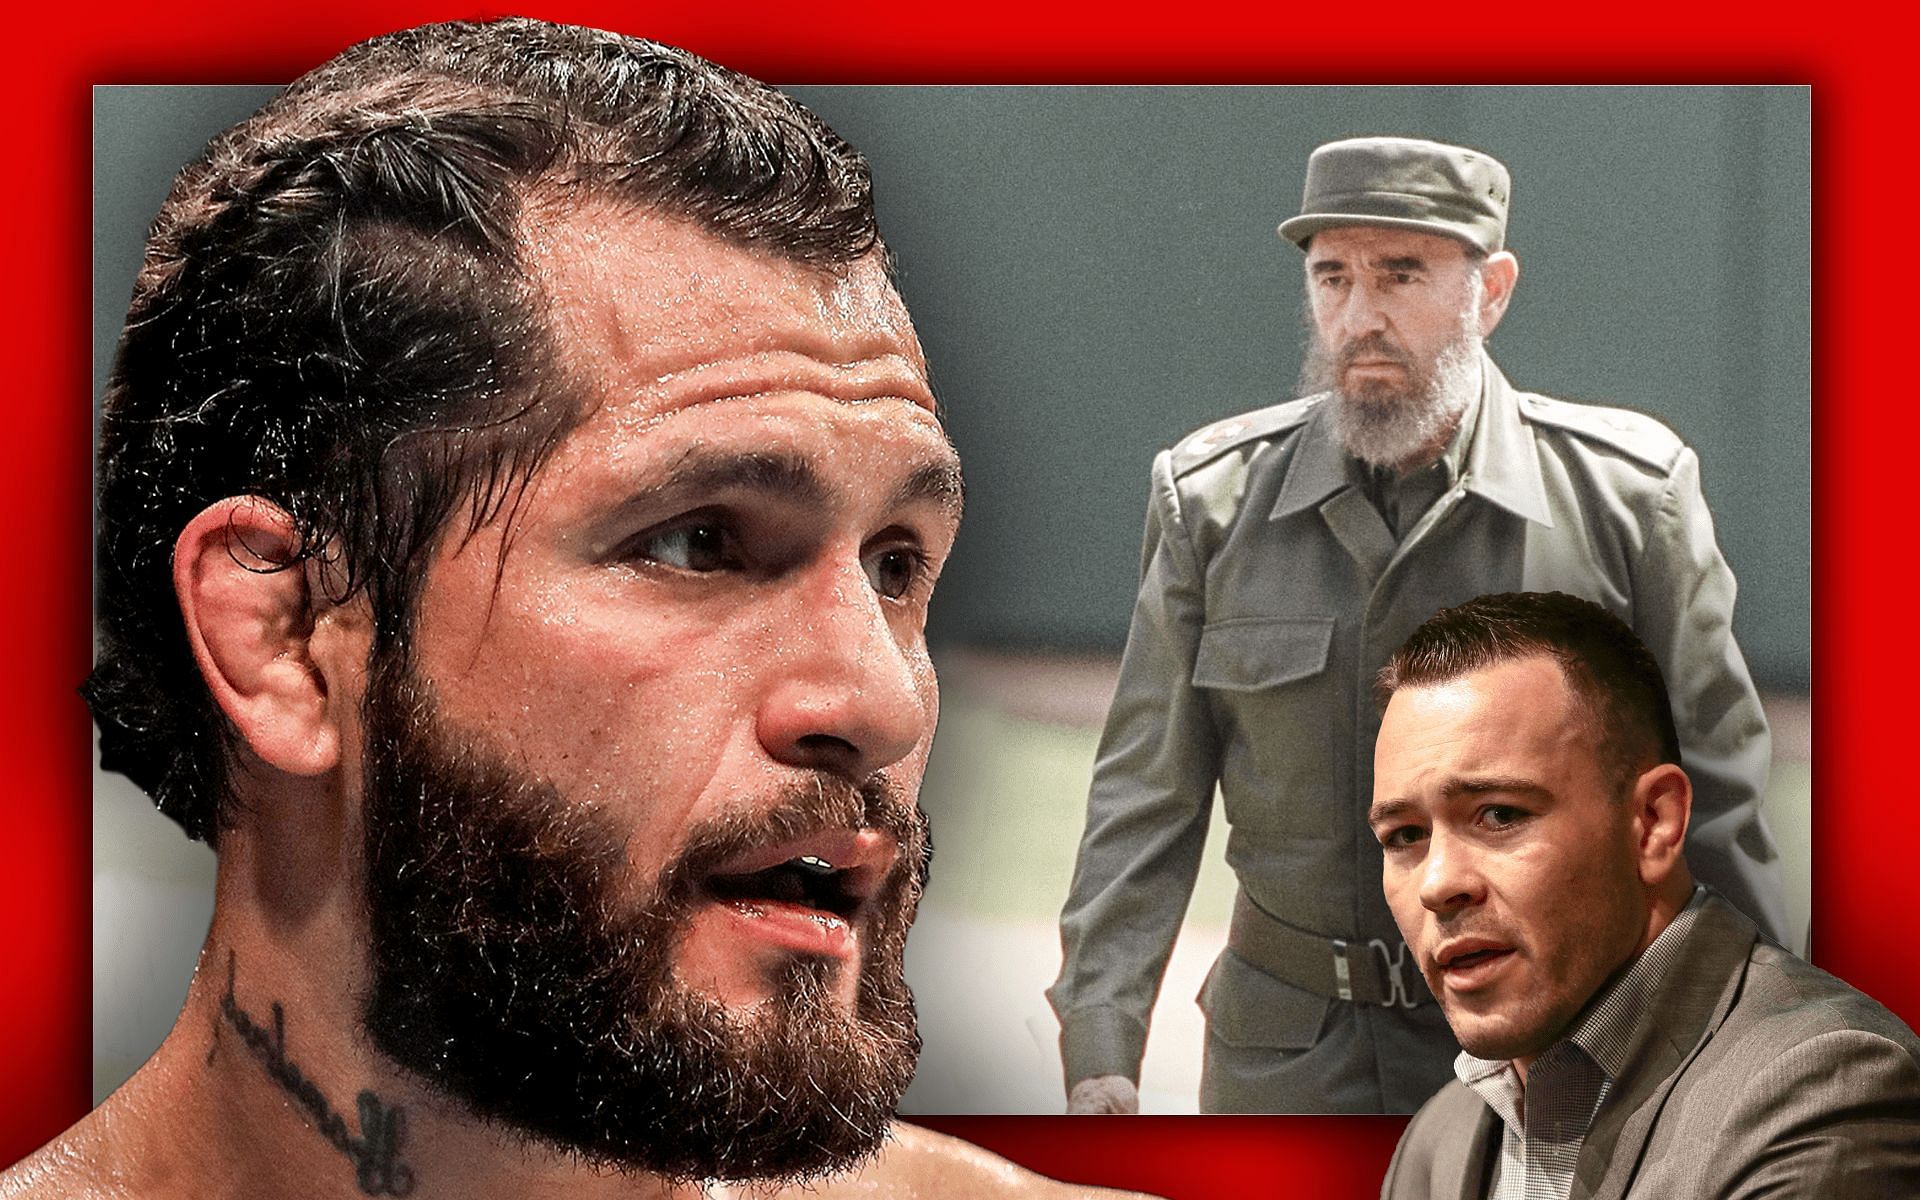 “He’s Fidel Castro Jr. – the guy is the definition of communism” – Colby Covington slams Jorge Masvidal for pretending to be right-winger after using Obama Phone and food stamps